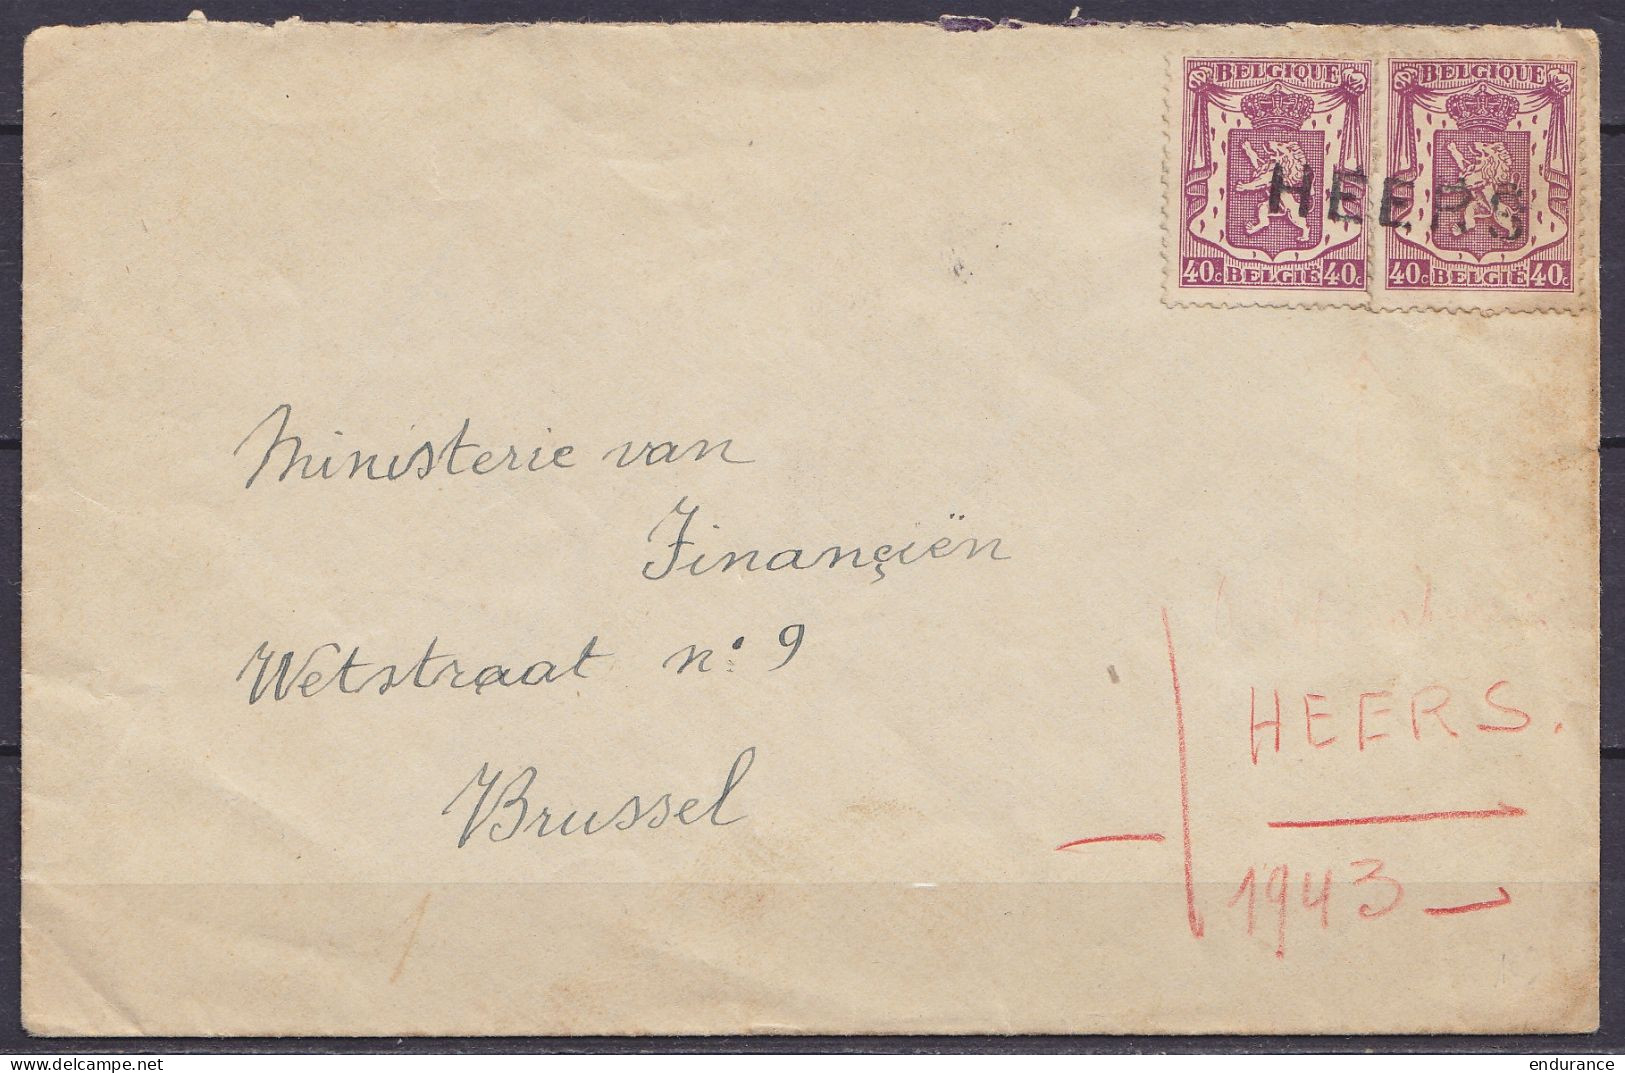 L. Affr.N°479x2 Oblit. Fortune Griffe "HEERS" 1943 Pour BRUSSEL - 1935-1949 Small Seal Of The State